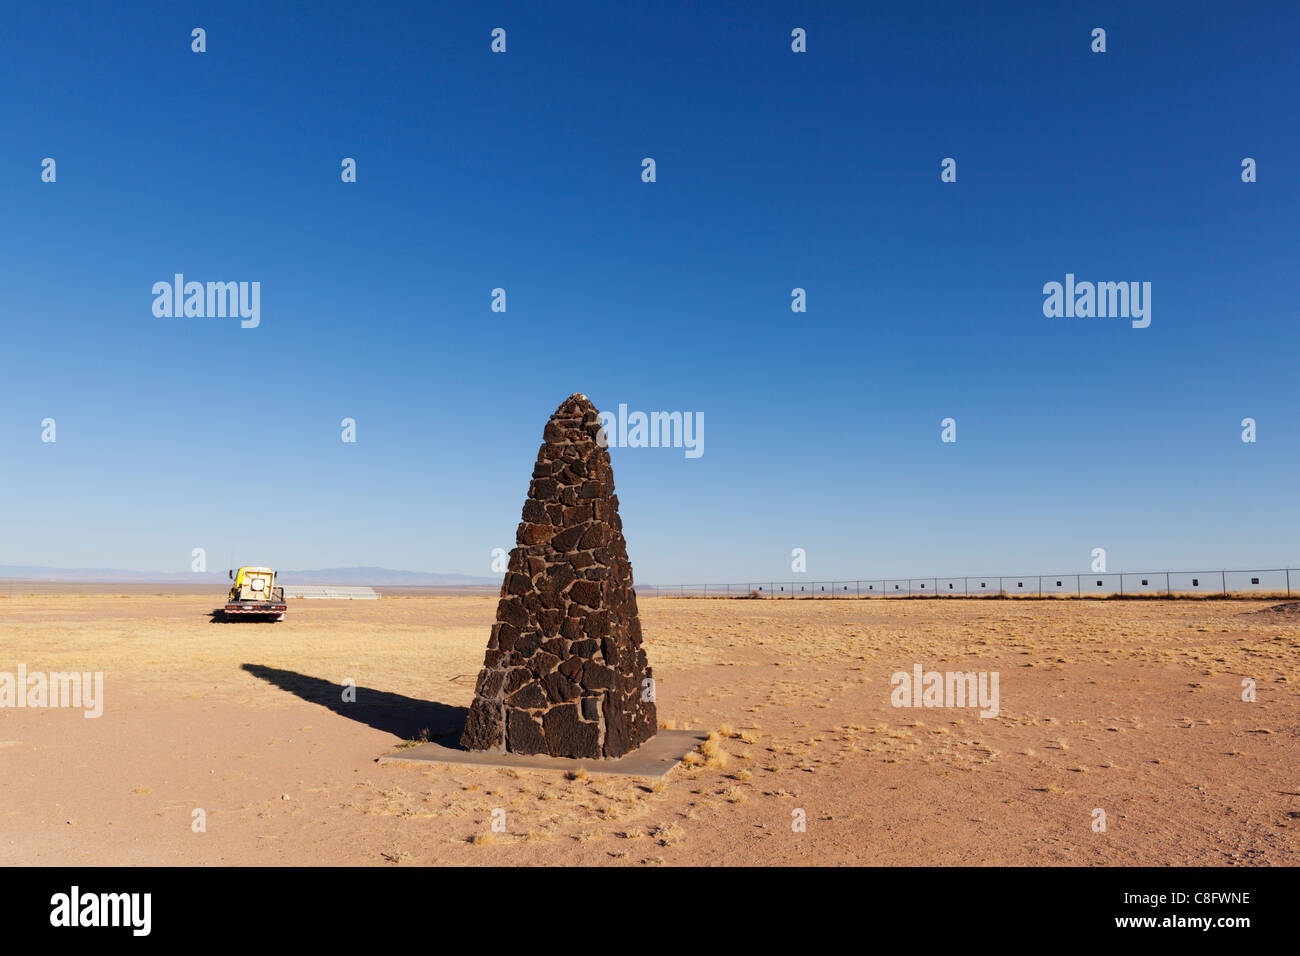 An obelisk in remote New Mexico marks the site of the world's first atomic bomb test in 1945 - called Trinity Site. Stock Photo